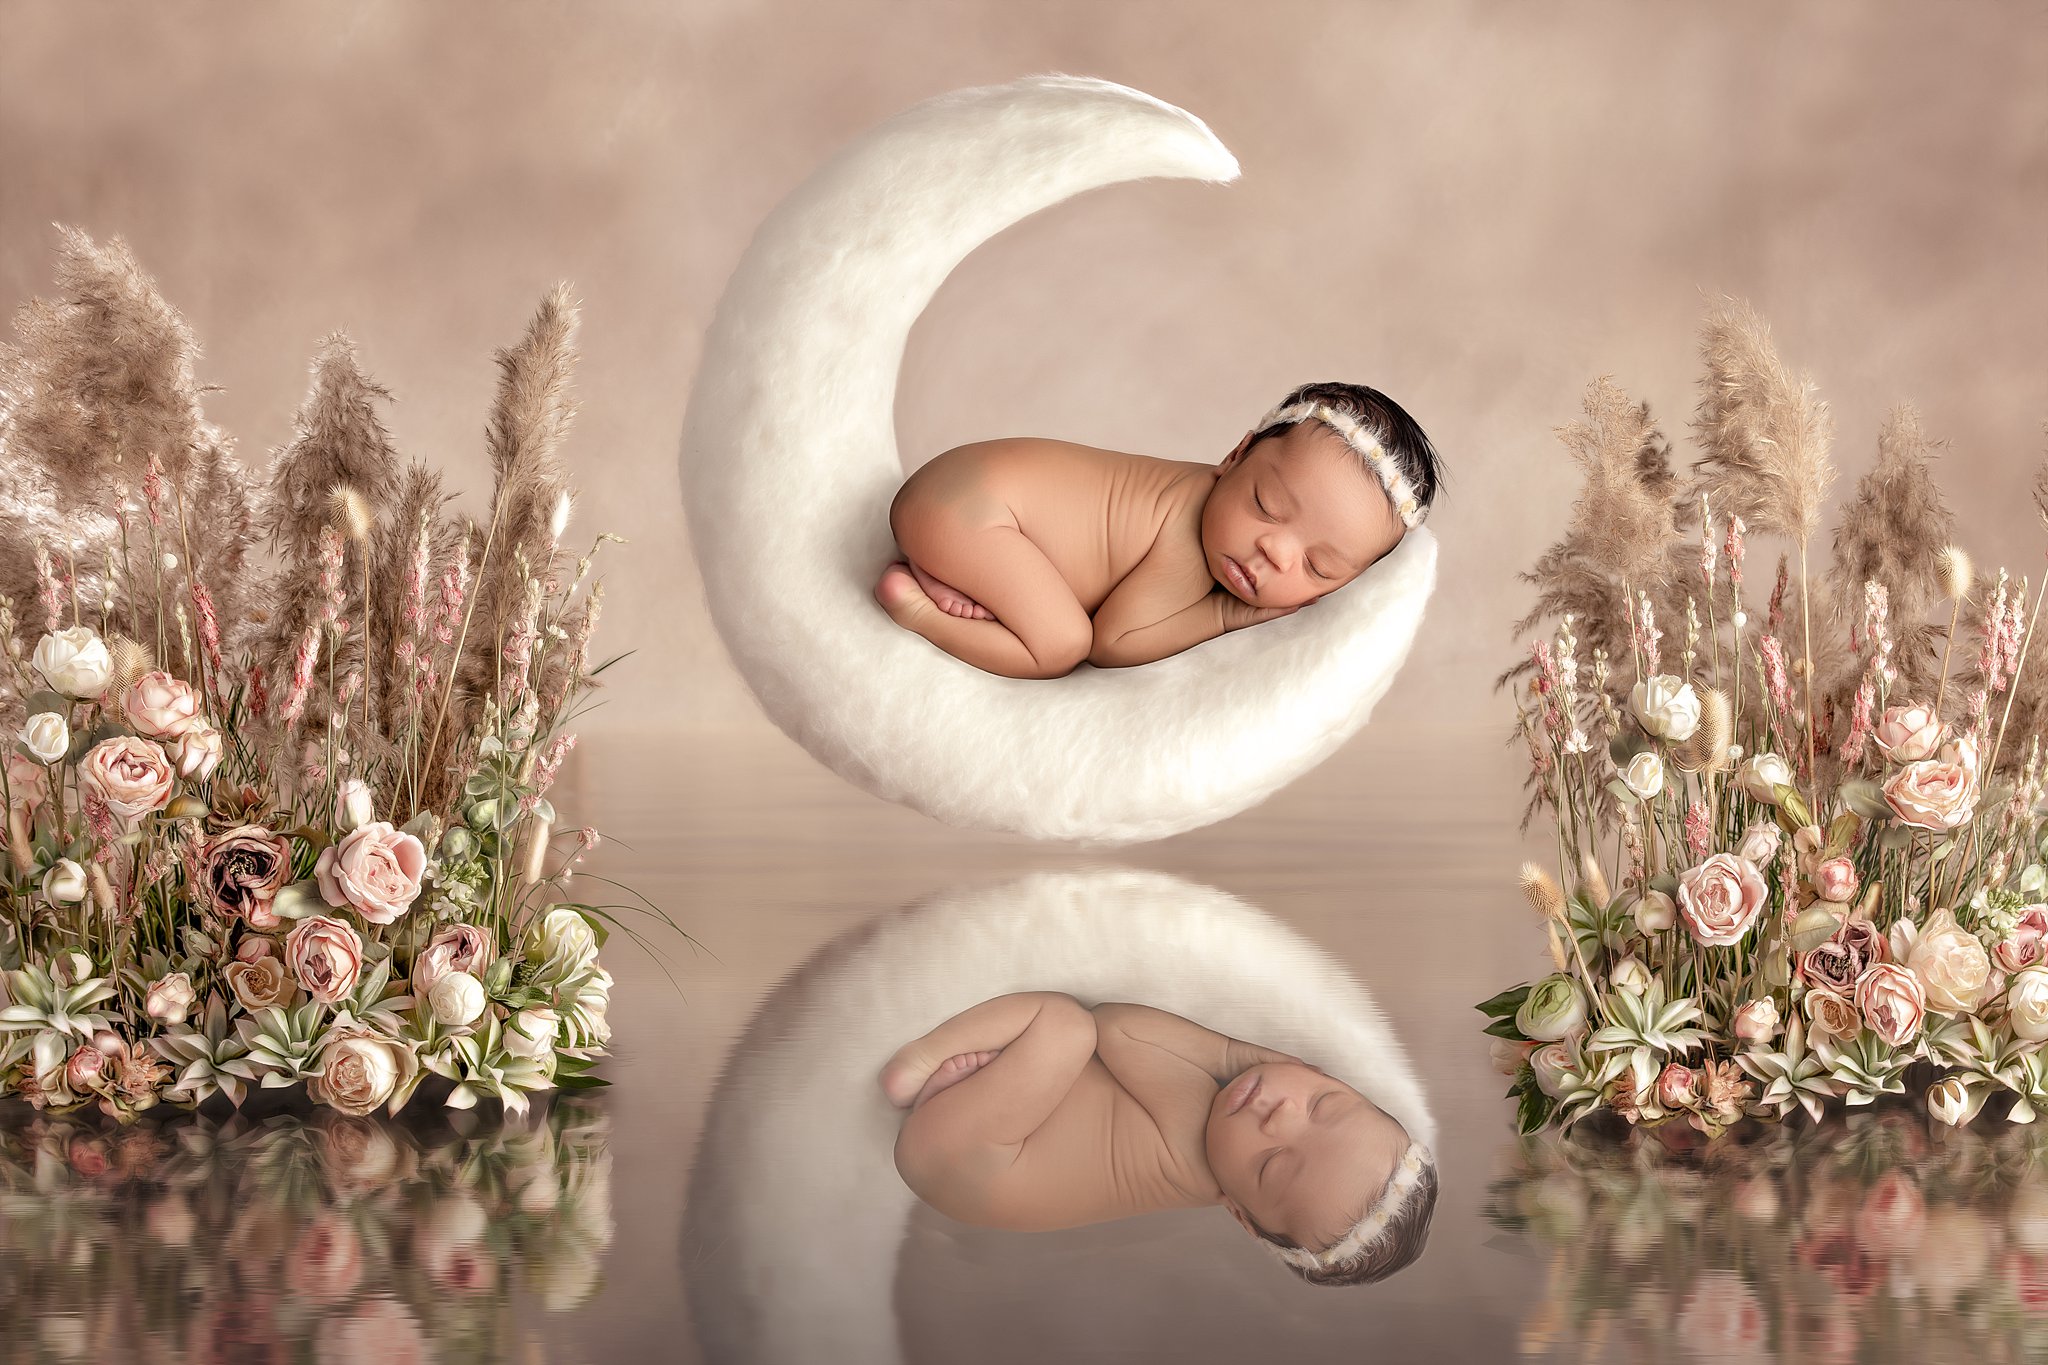 A newborn baby sleeps on a moon above water with flowers on either side your happy nest